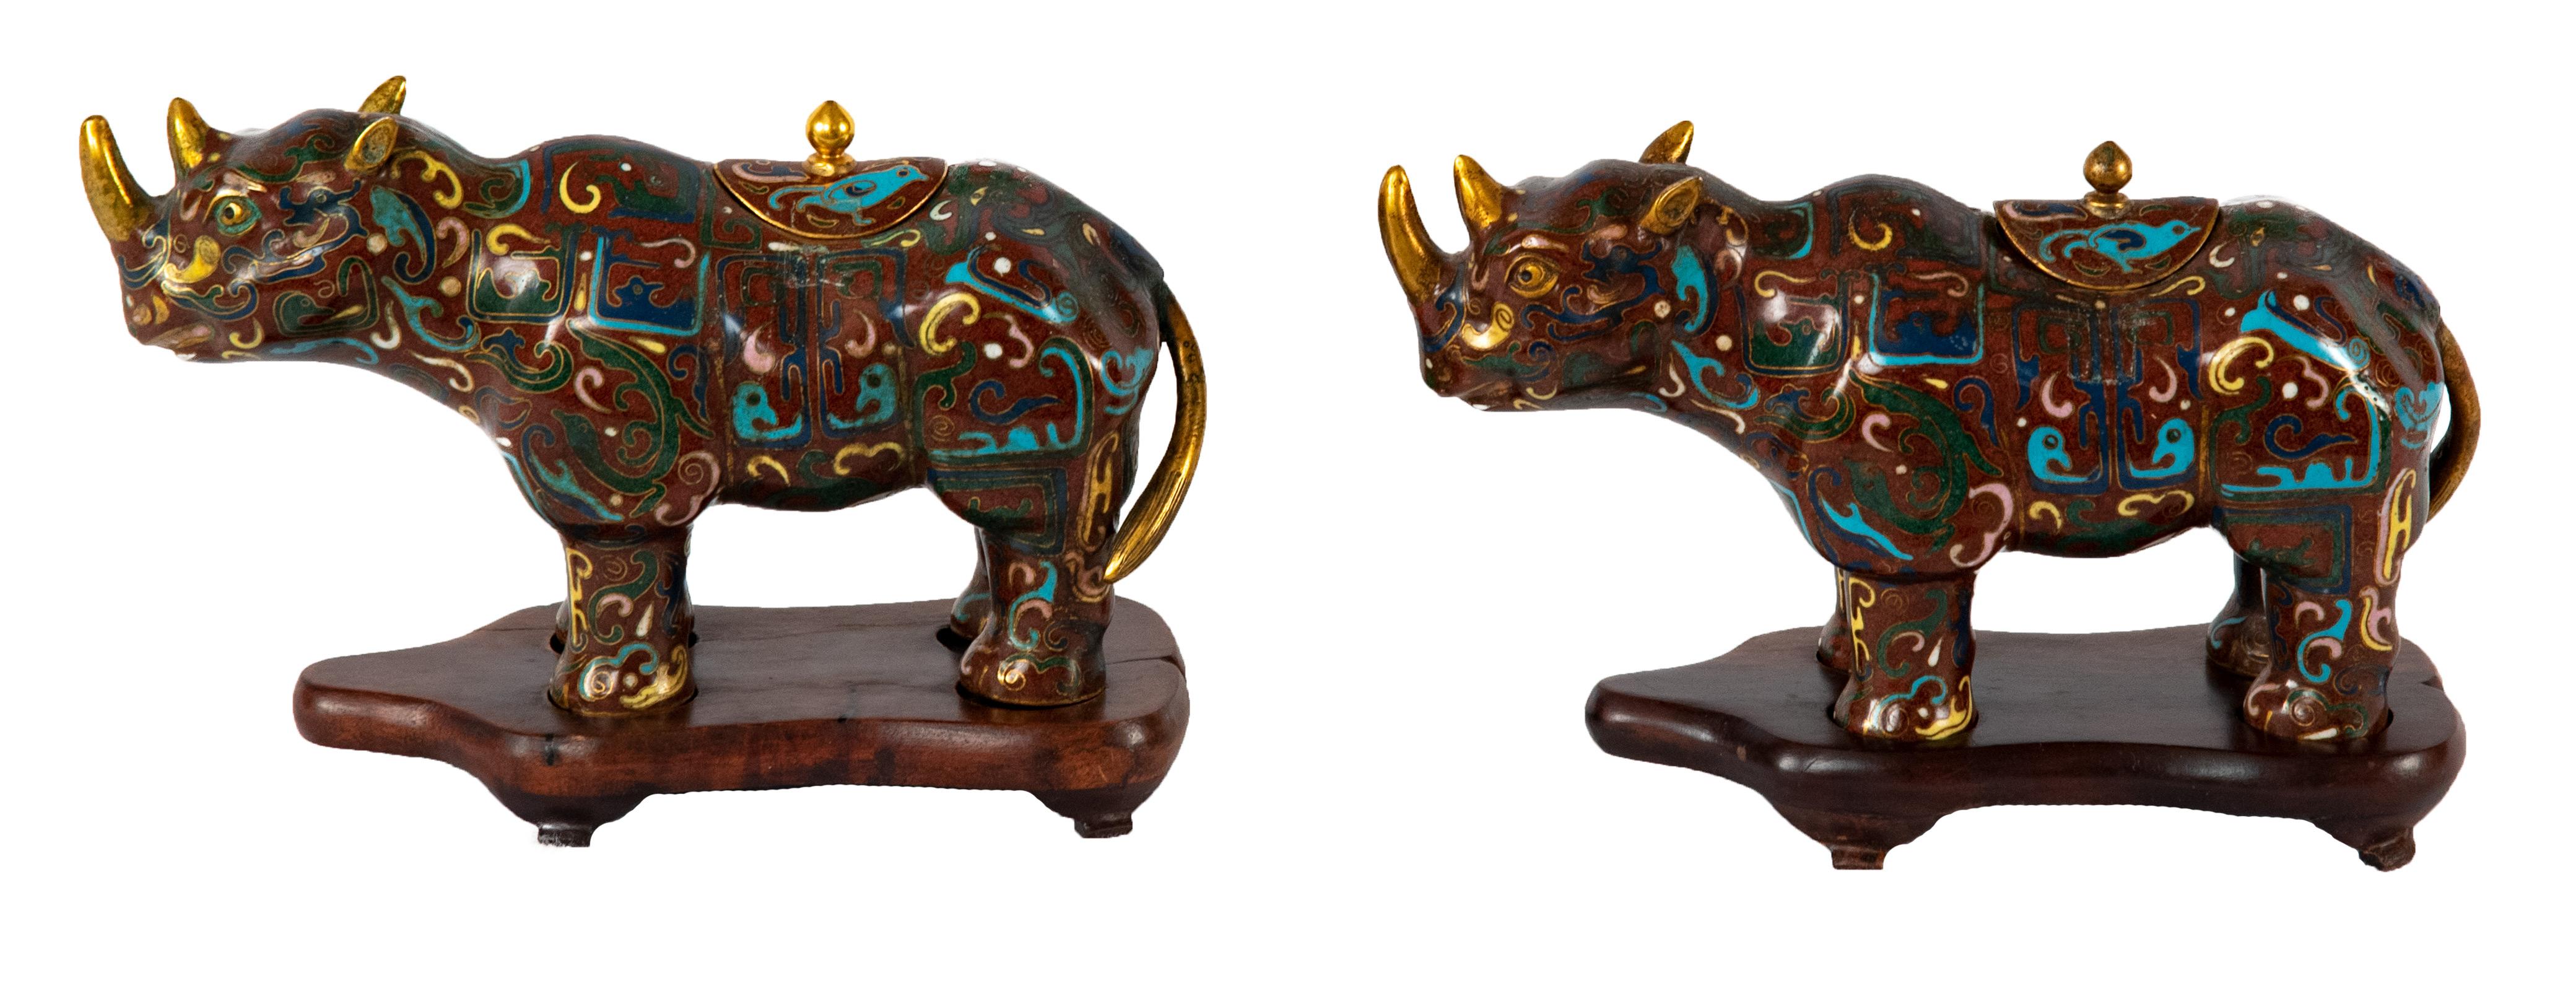 Pair of Chinese Cloisonné Rhinoceros-form Water Pots, Qing Dynasty In Good Condition For Sale In Salt Lake City, UT